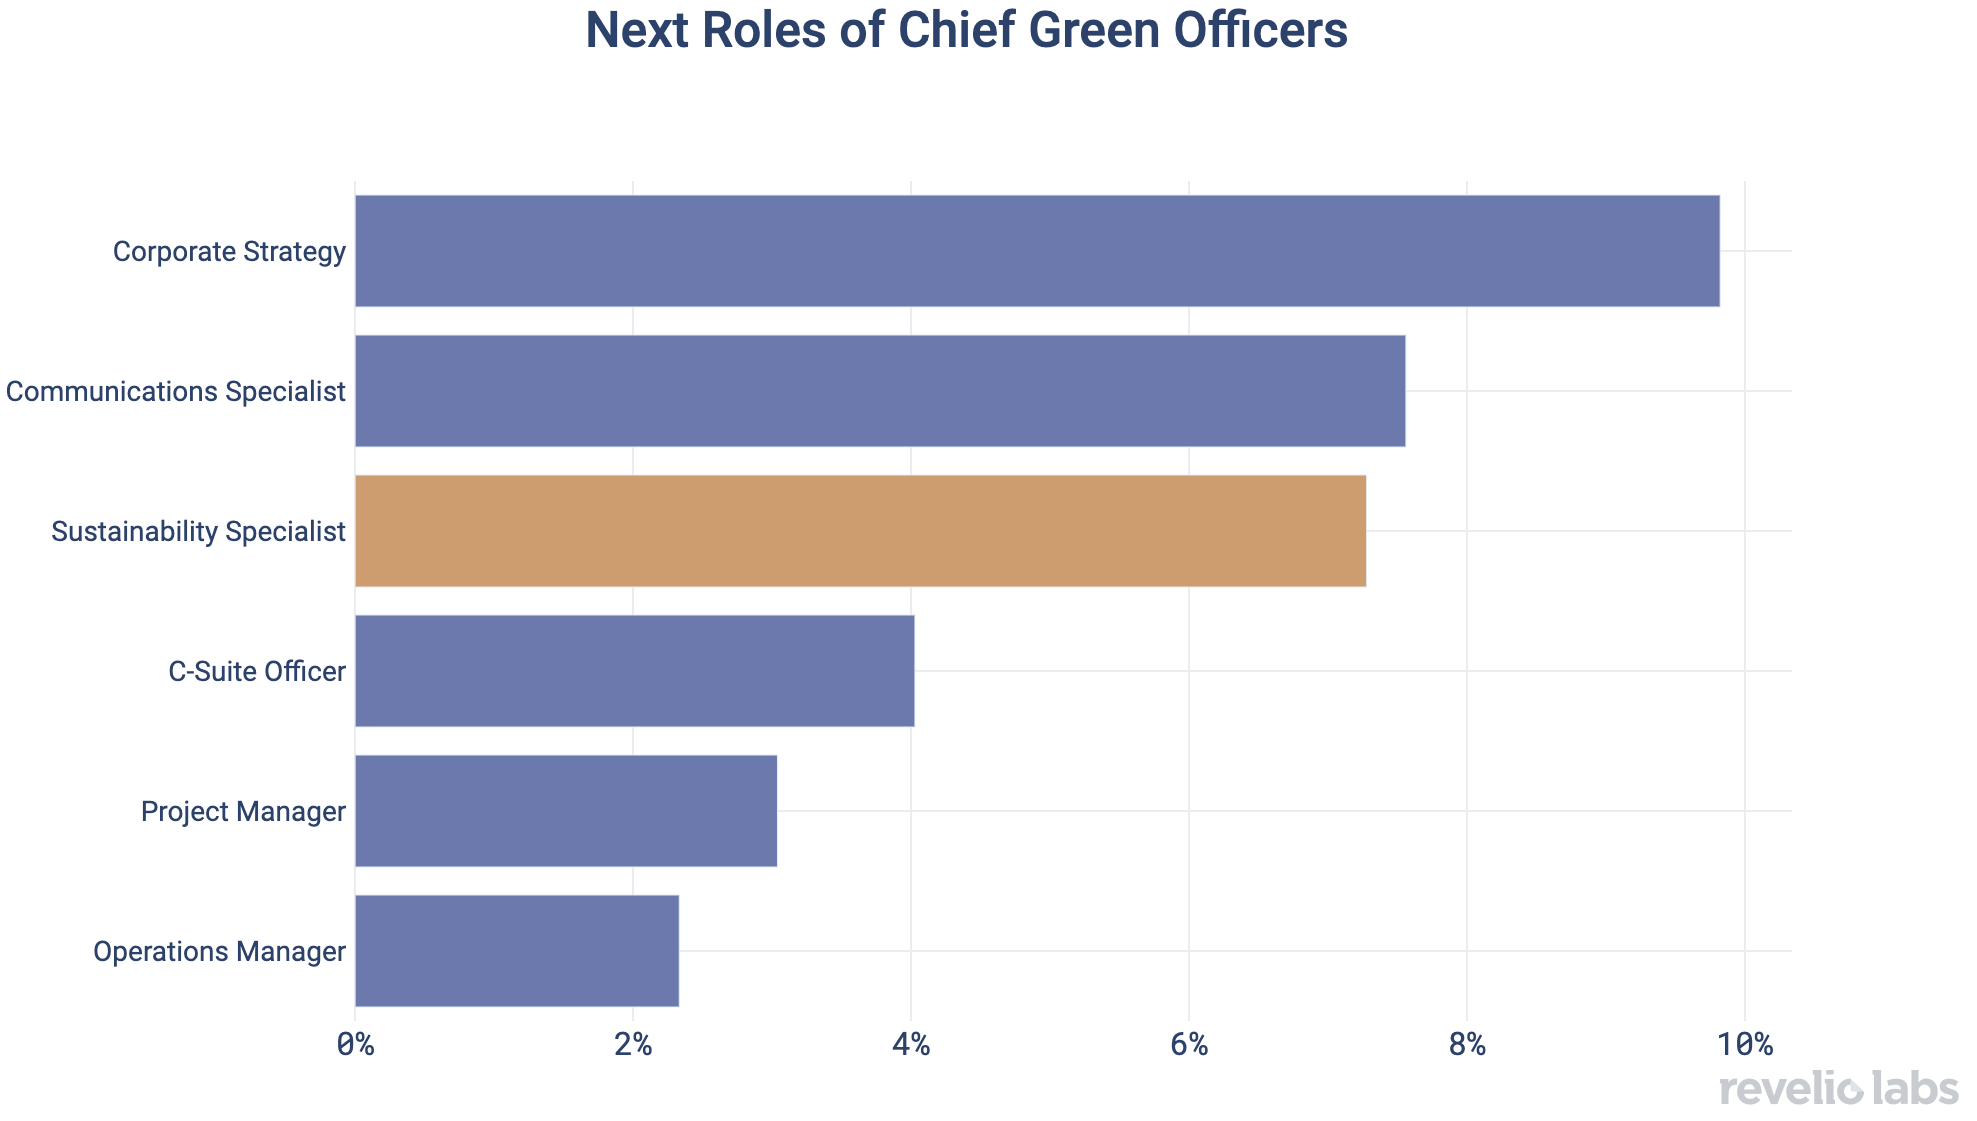 Next Roles of Chief Green Officers